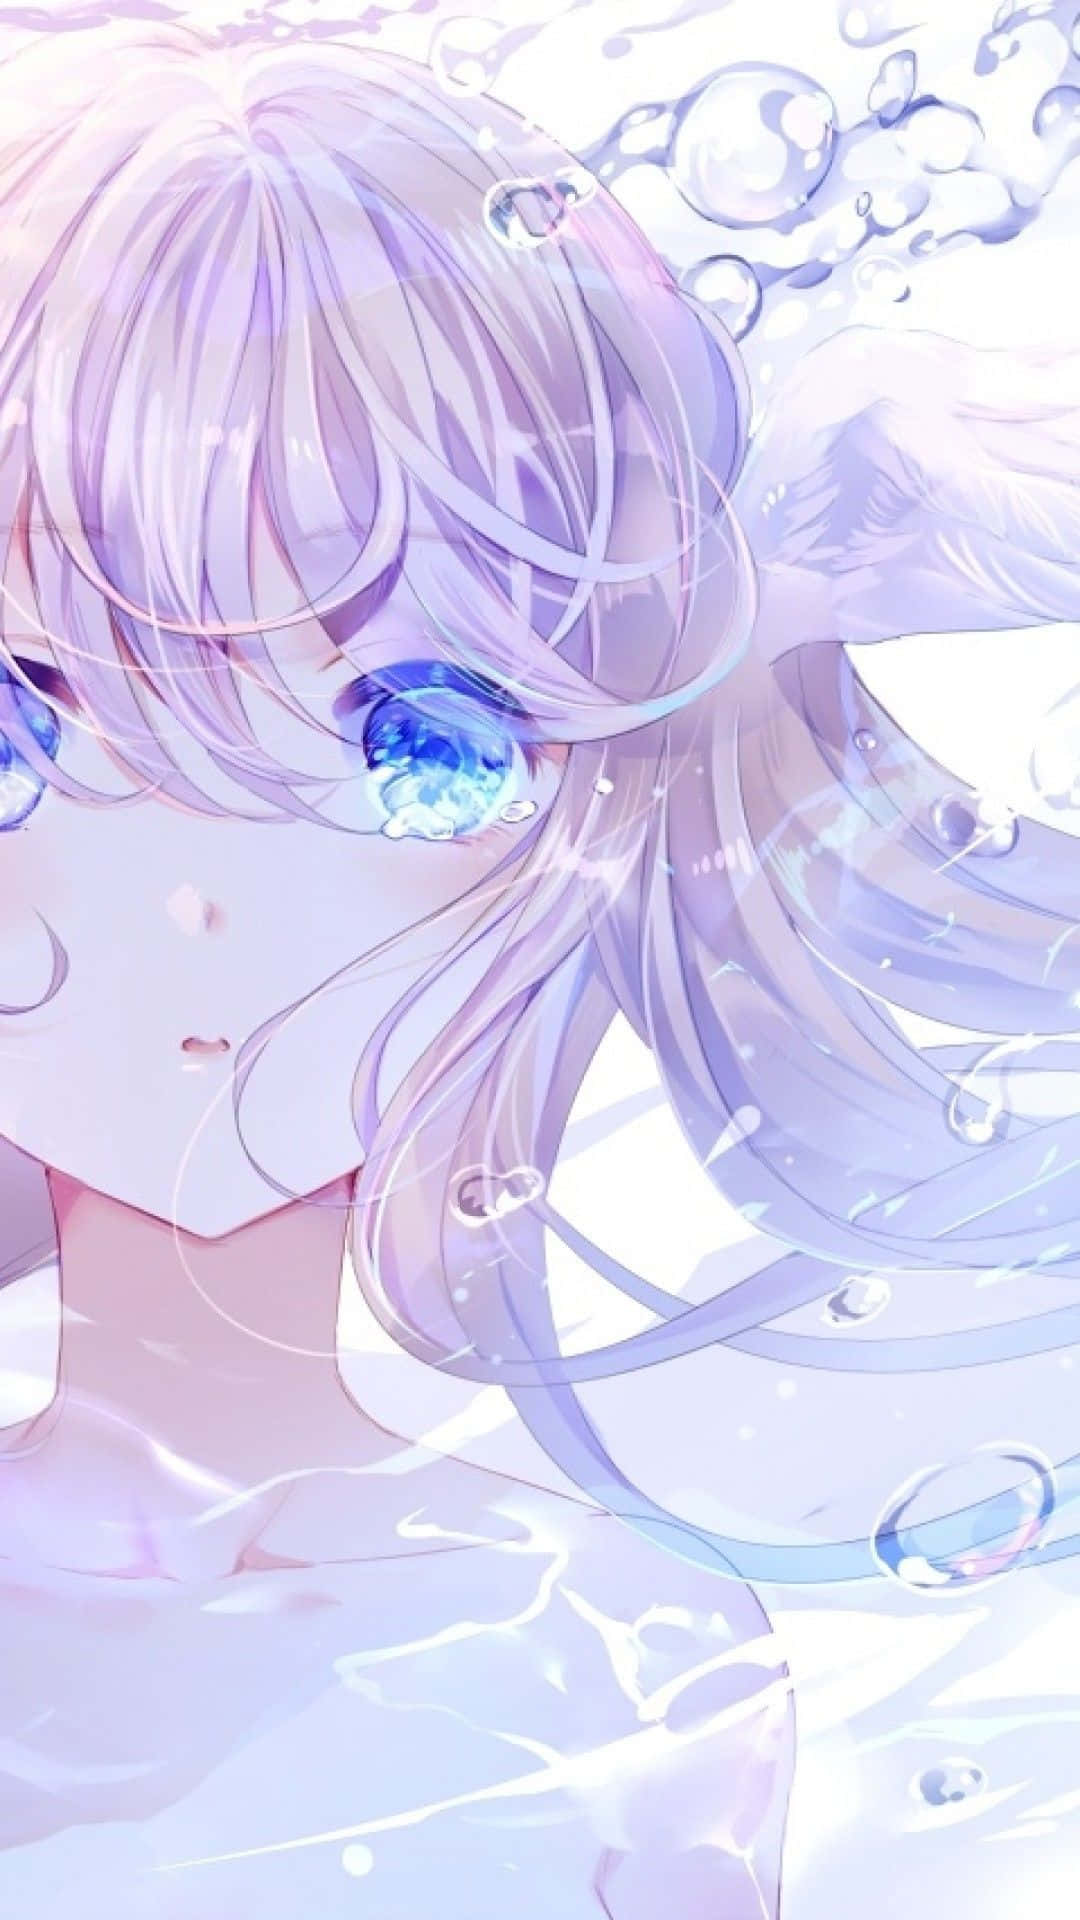 Sad_ Anime_ Girl_with_ Teary_ Eyes_and_ Bubbles Wallpaper